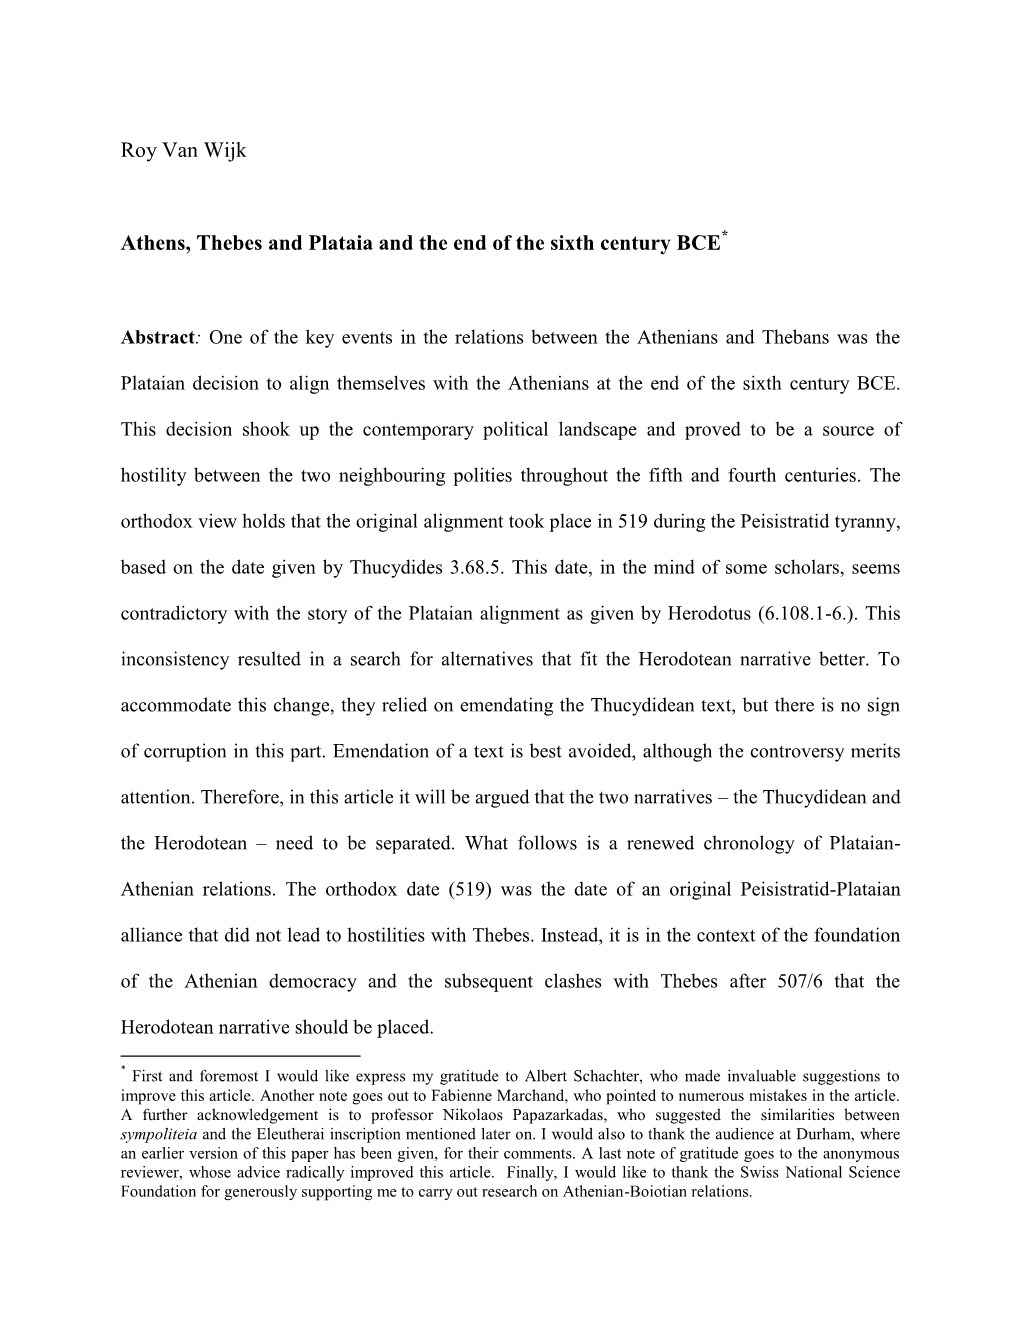 Roy Van Wijk Athens, Thebes and Plataia and the End of the Sixth